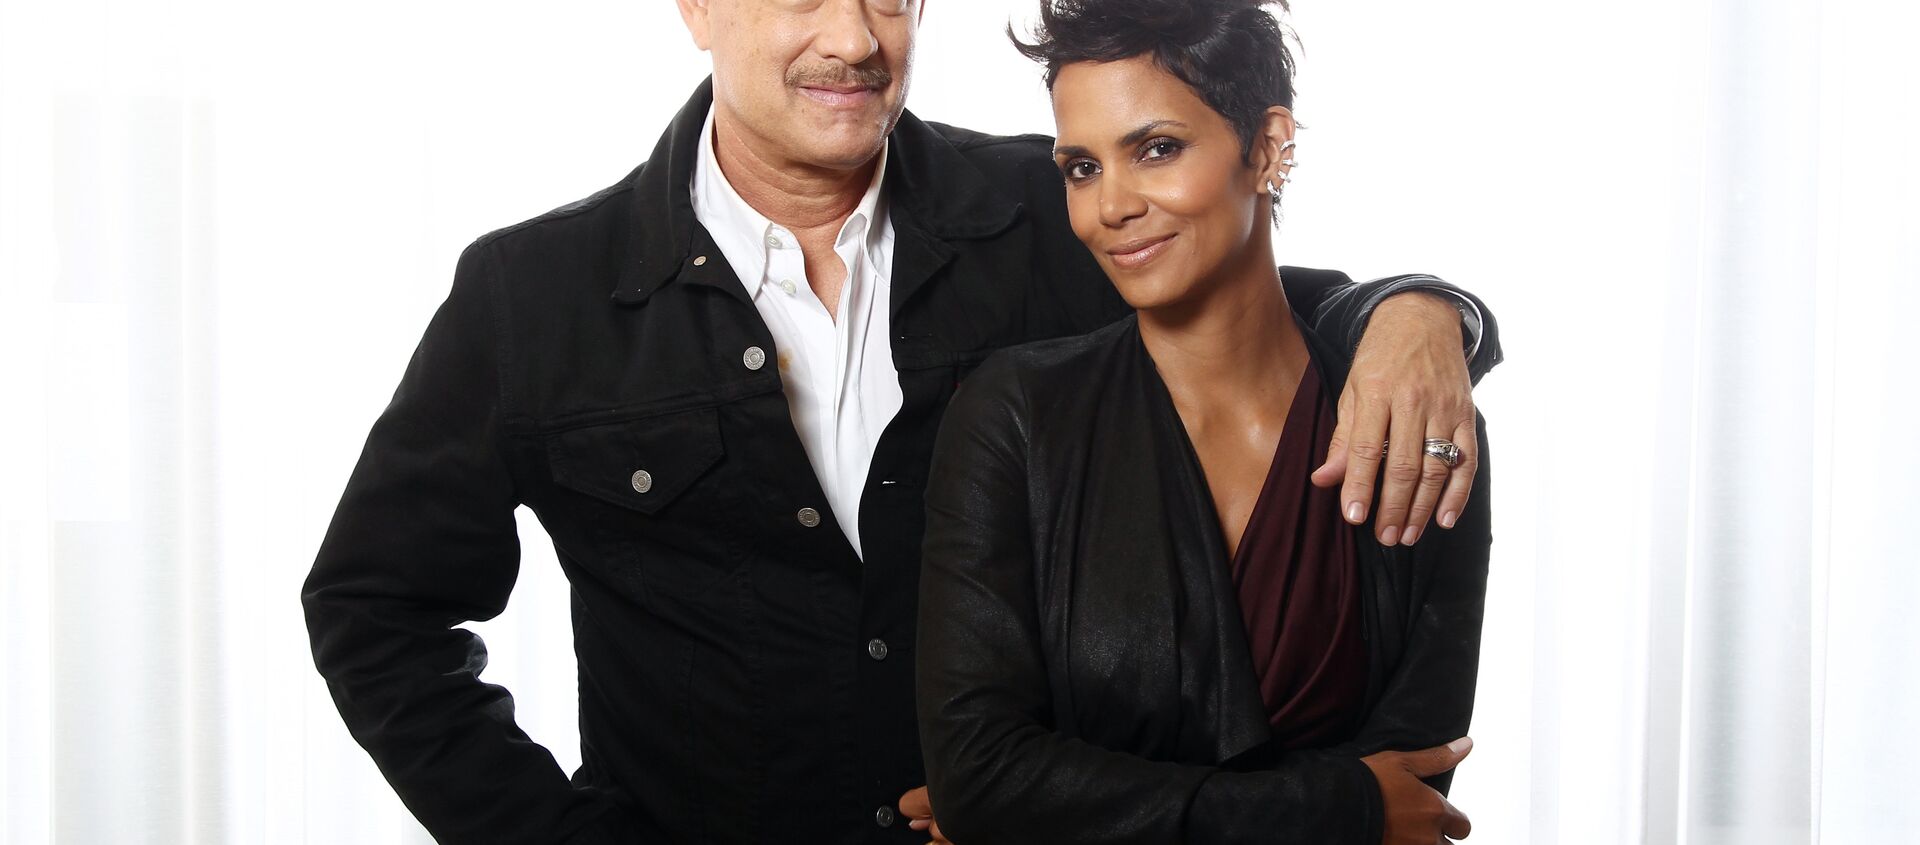 Actors Tom Hanks, left, and Halle Berry, from the upcoming film Cloud Atlas, pose for a portrait in Beverly Hills, California. - Sputnik International, 1920, 27.03.2021